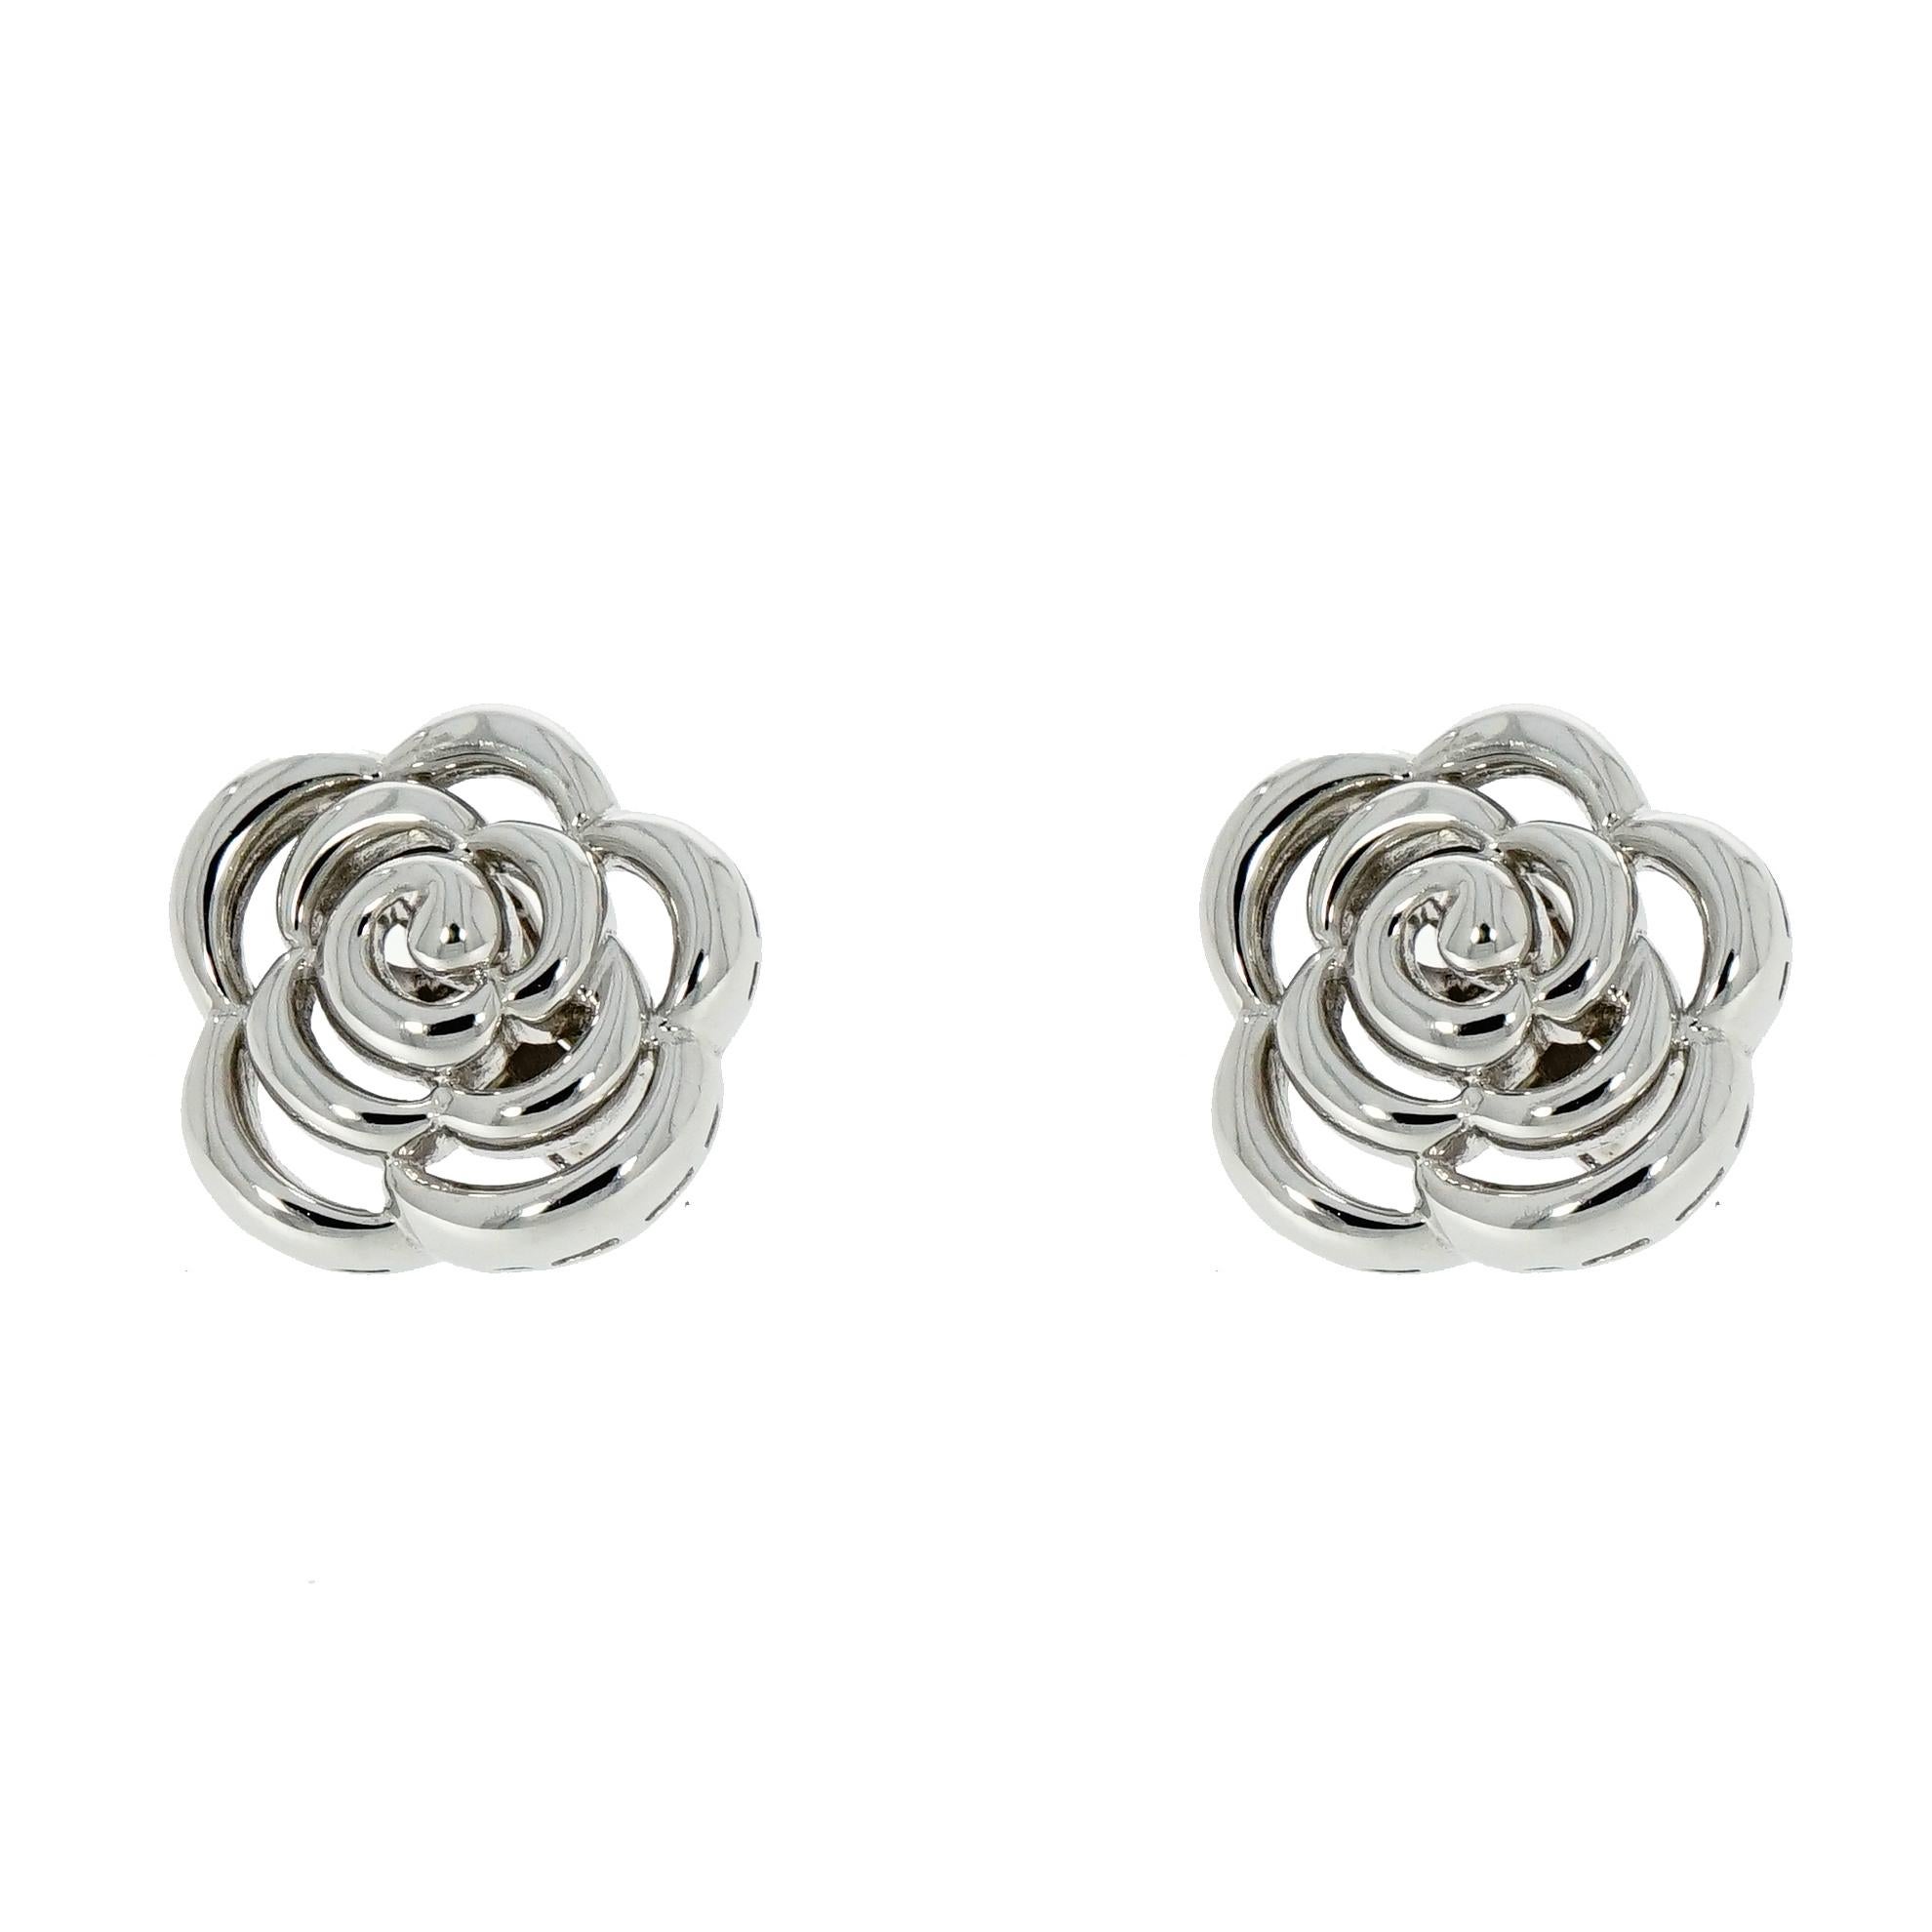 Van Cleef & Arpels has always celebrated nature with its flowers, recreating their lightness through beautiful pieces of jewelry. 
This exceptional white gold flower earrings from Van Cleef & Arpels, crafted in high polished 18k white gold. 
The